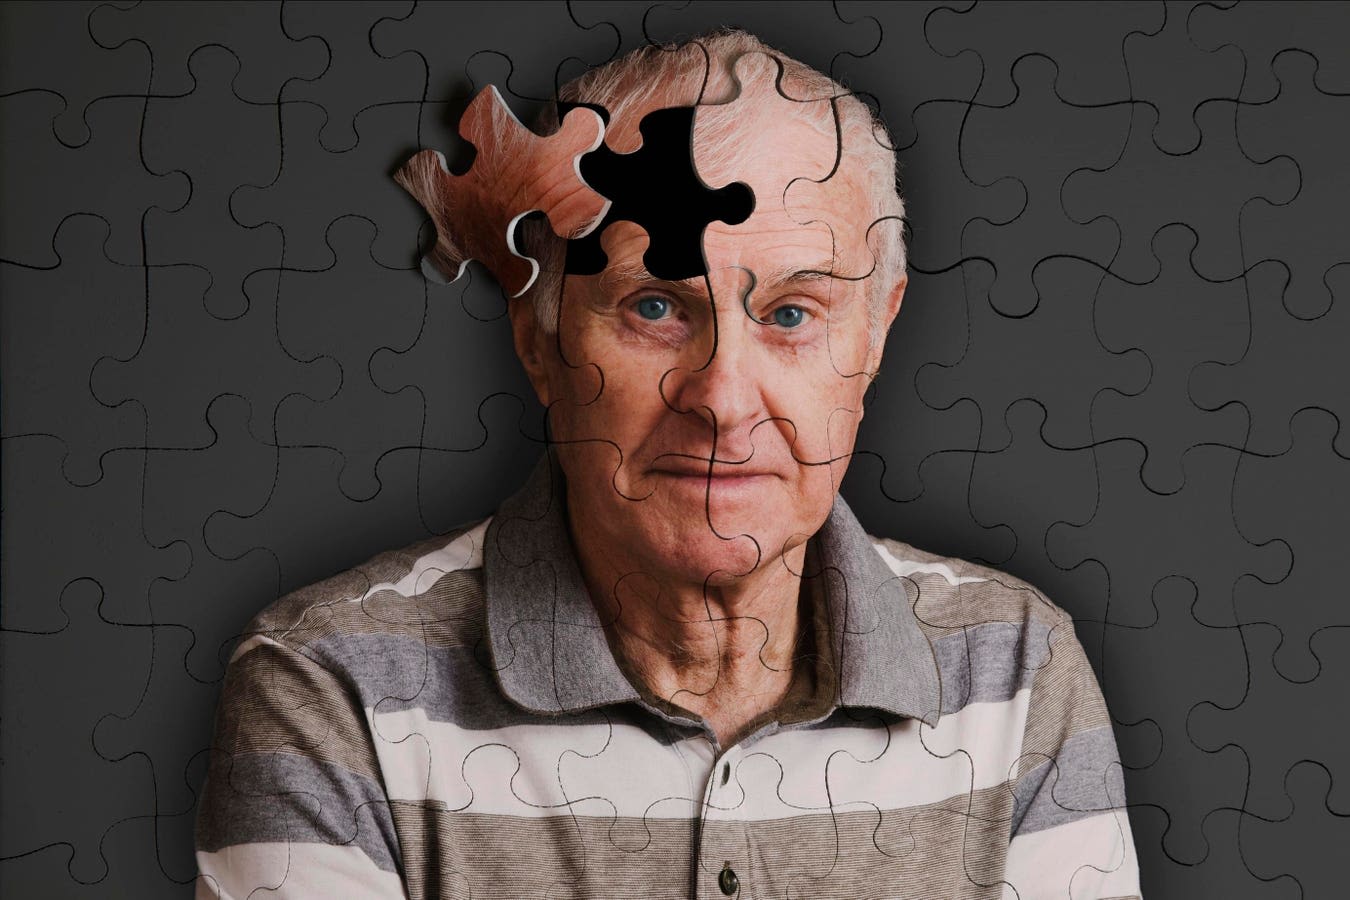 How To Prevent Alzheimer’s Disease: A Case For Vaccines